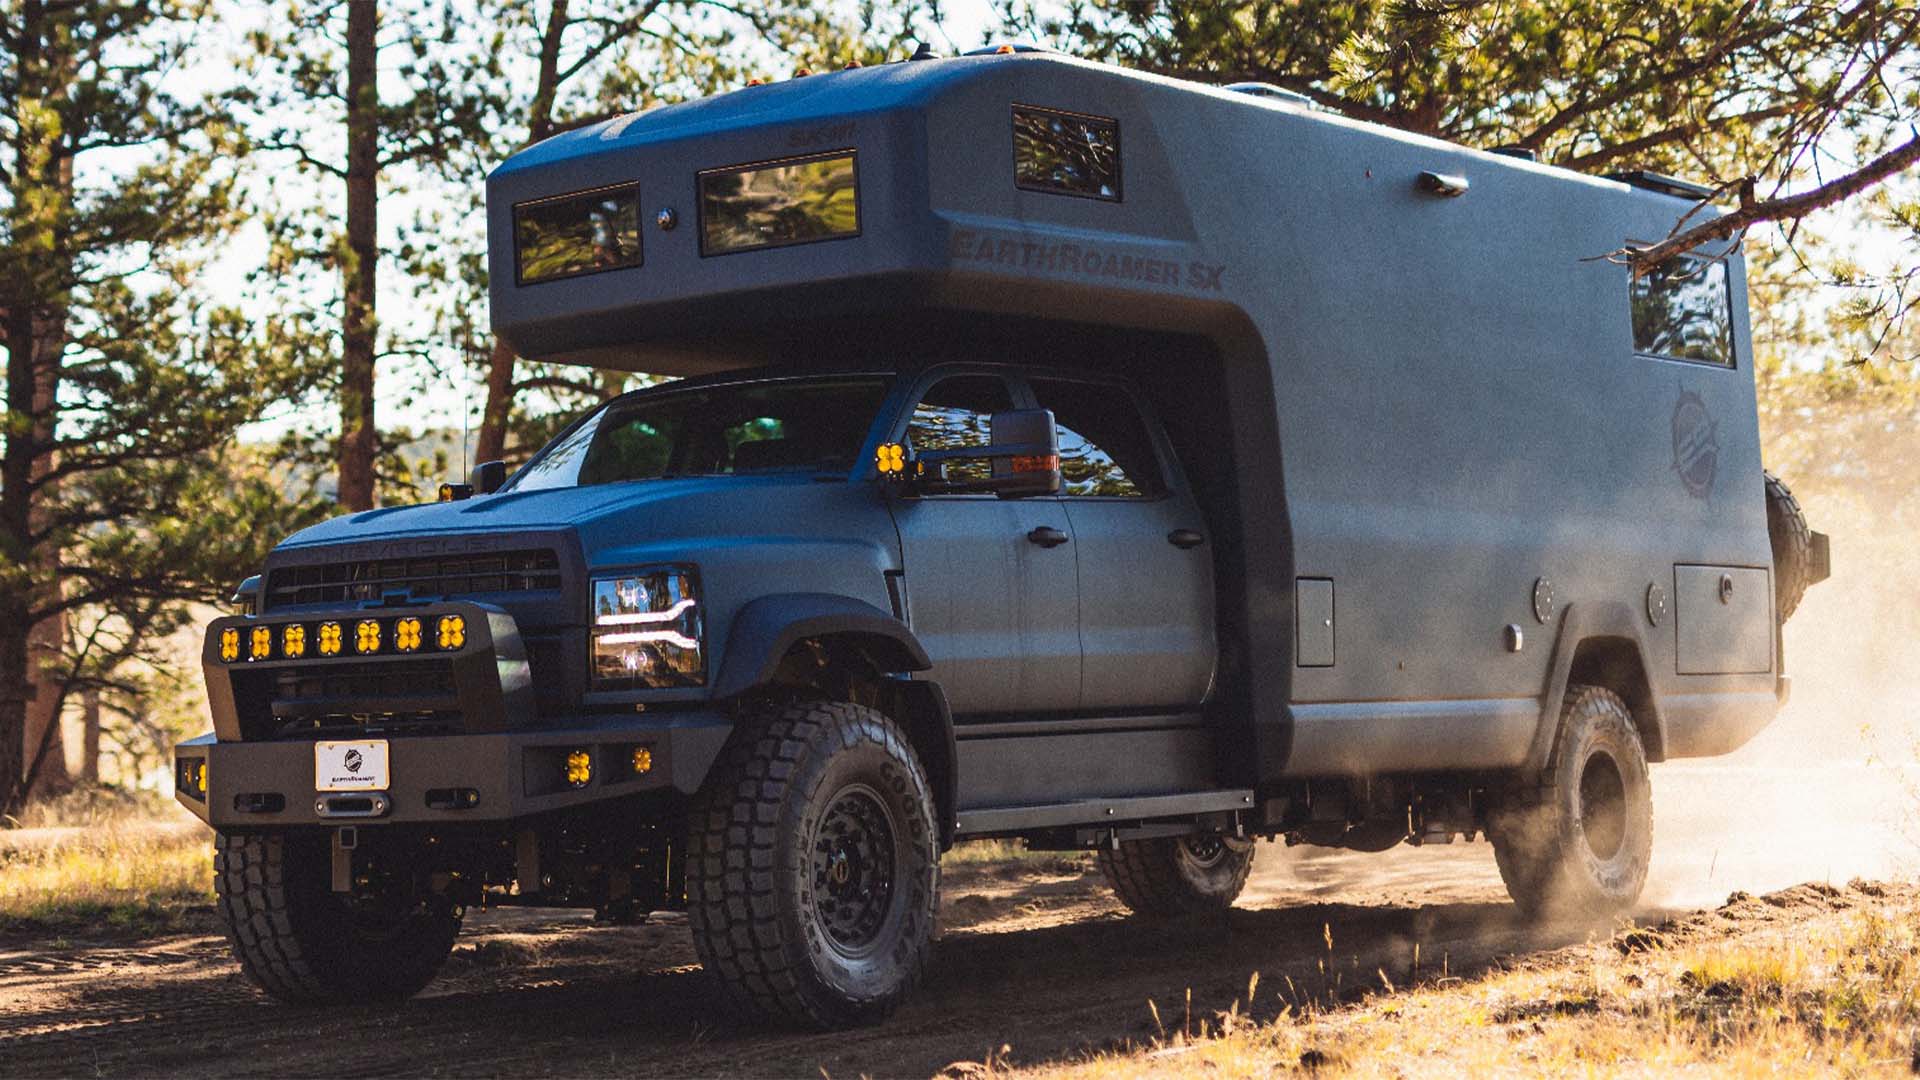 The Earthroamer SX Is a $1M Chevy Silverado Overland Rig on 43s